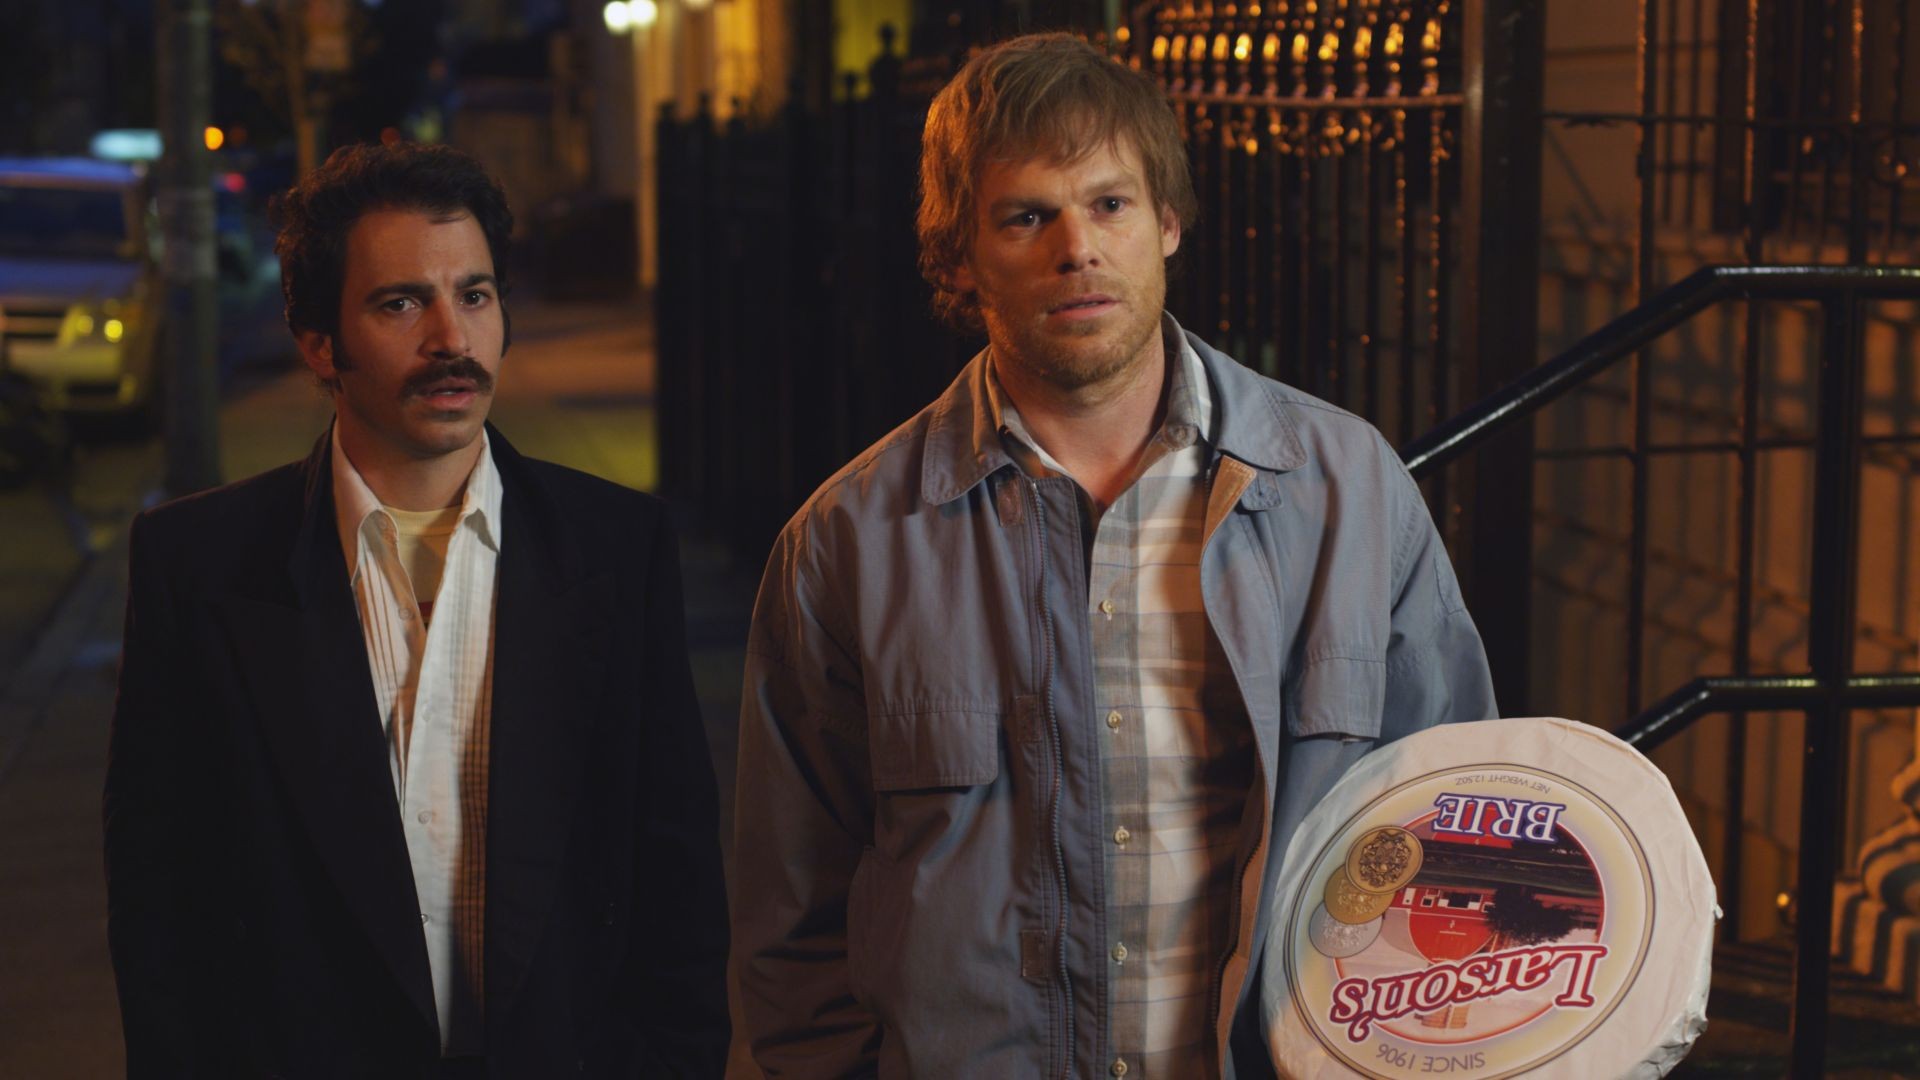 Chris Messina stars as NJ Michael C. Hall stars as Morris Bliss in Variance Films' The Trouble with Bliss (2012)